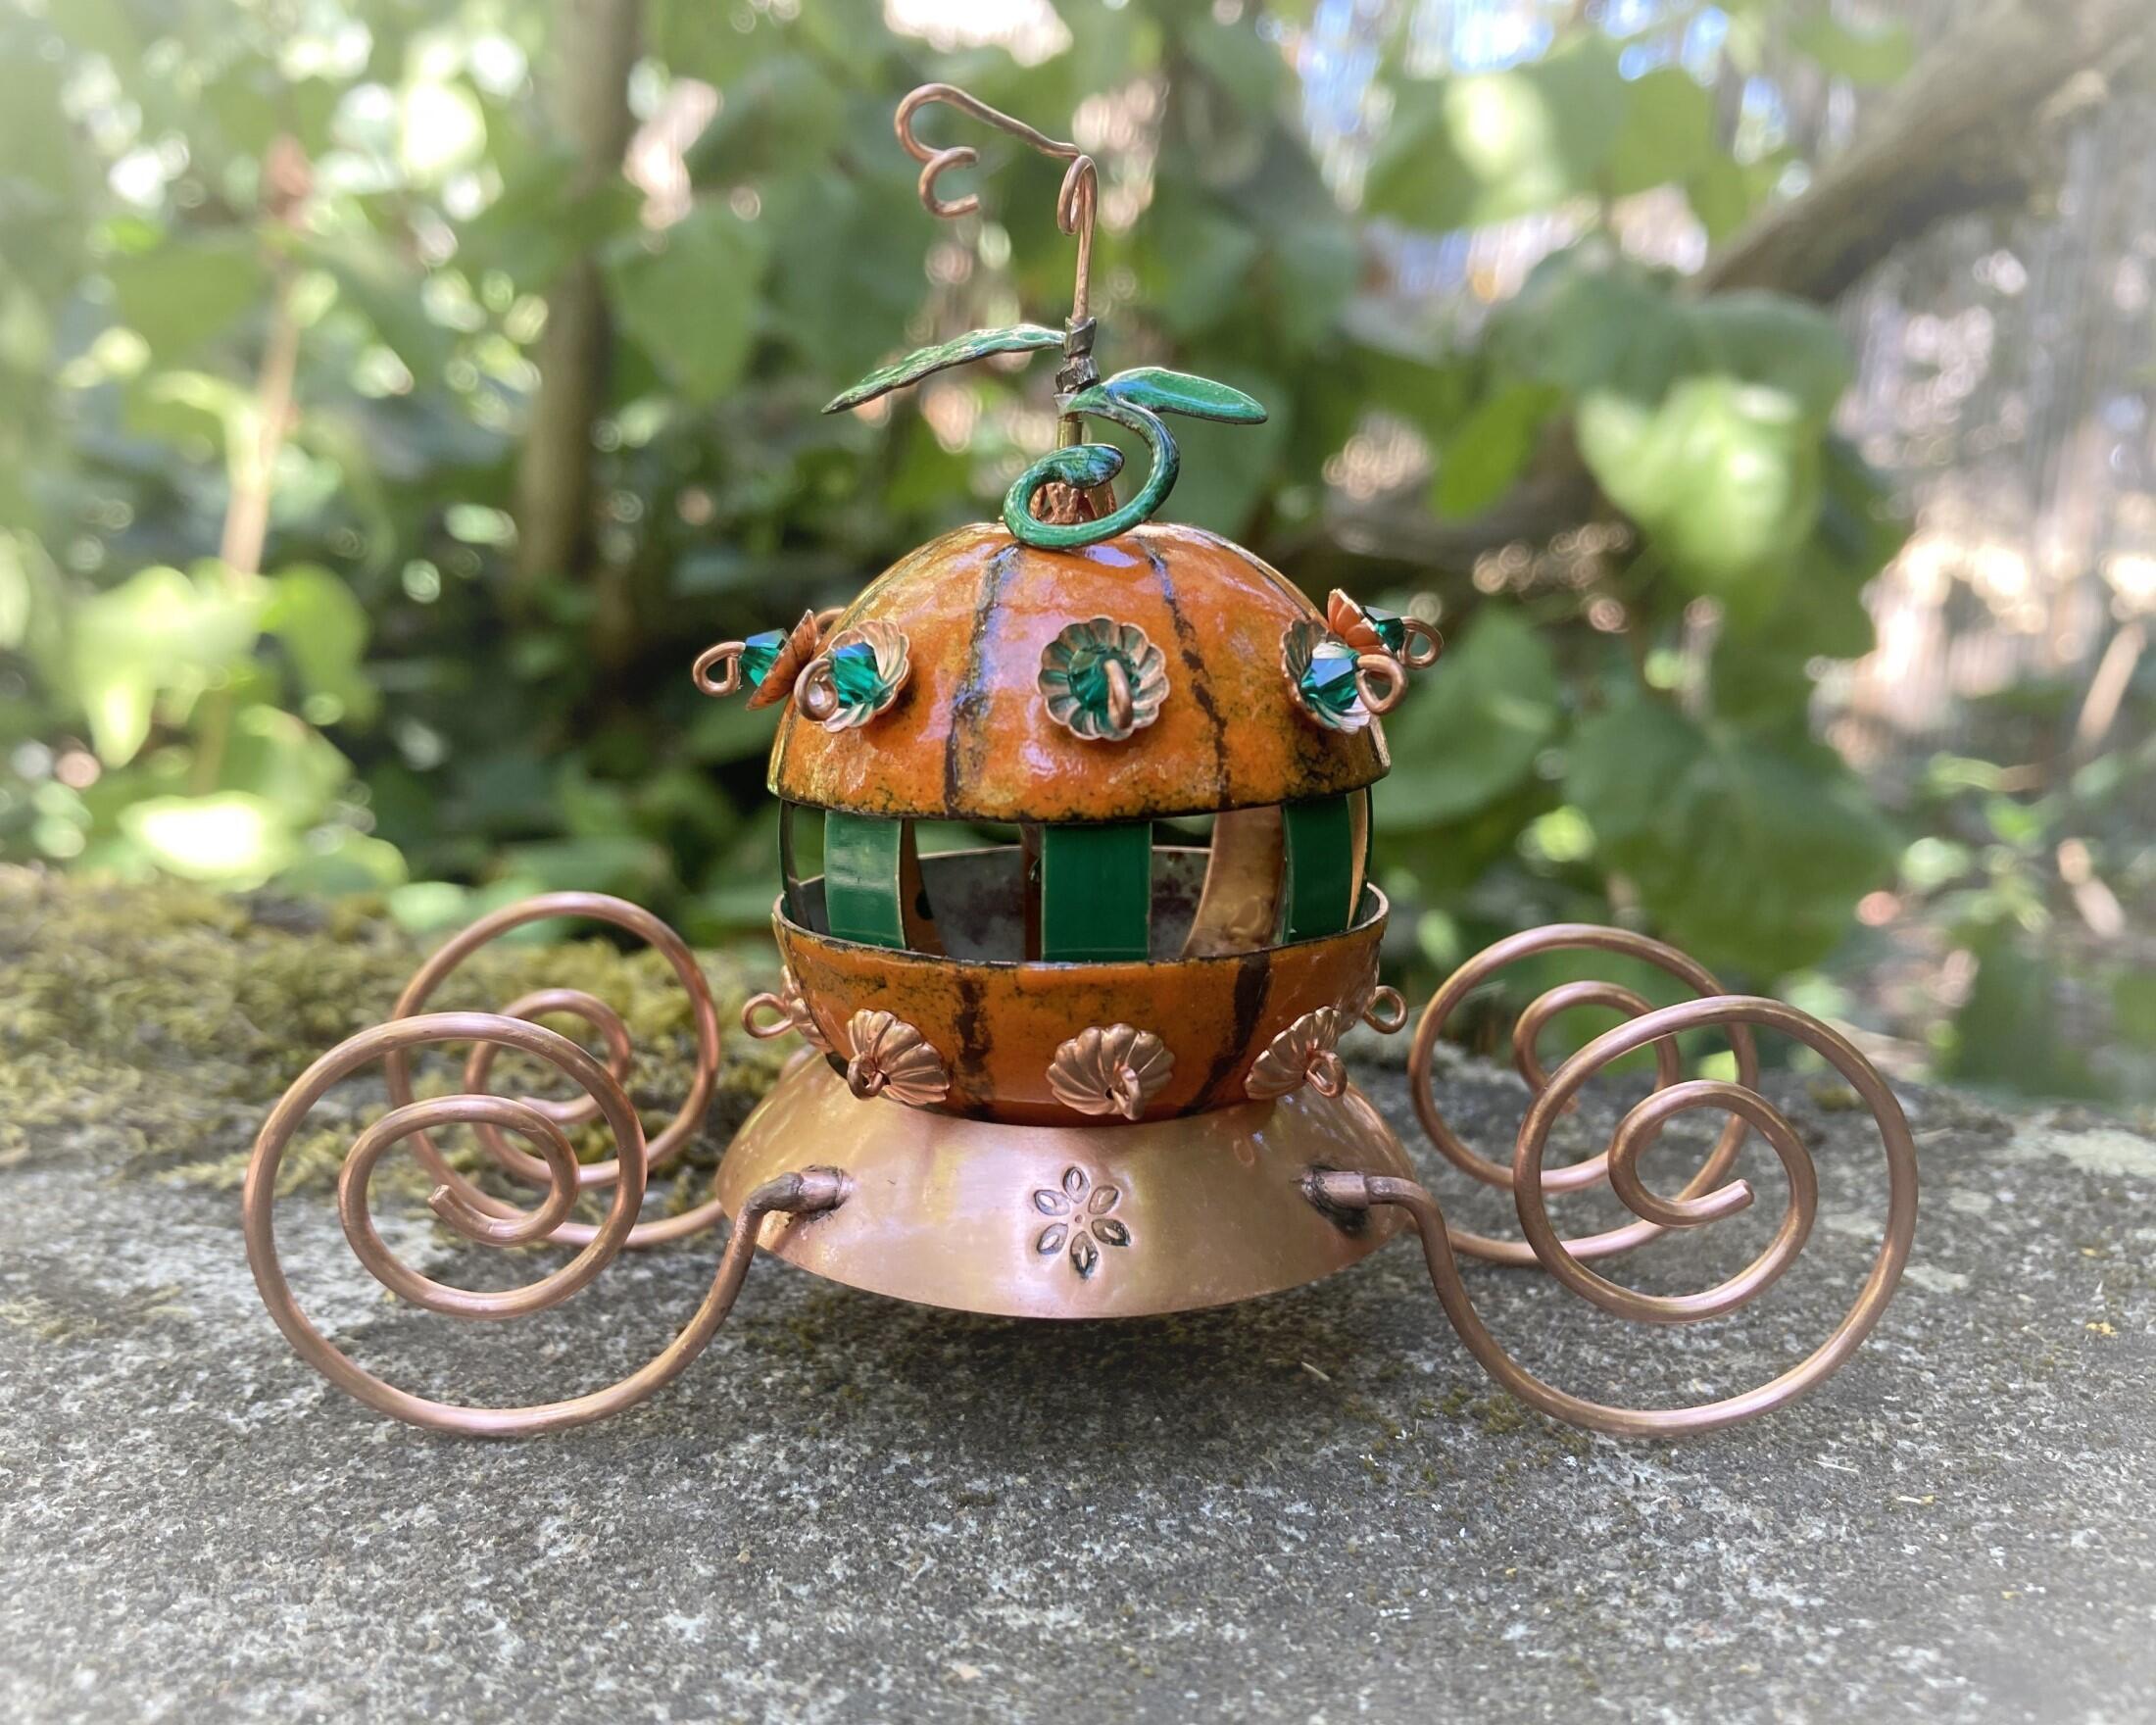 miniature pumpkin carriage made of copper enamel and copper wire